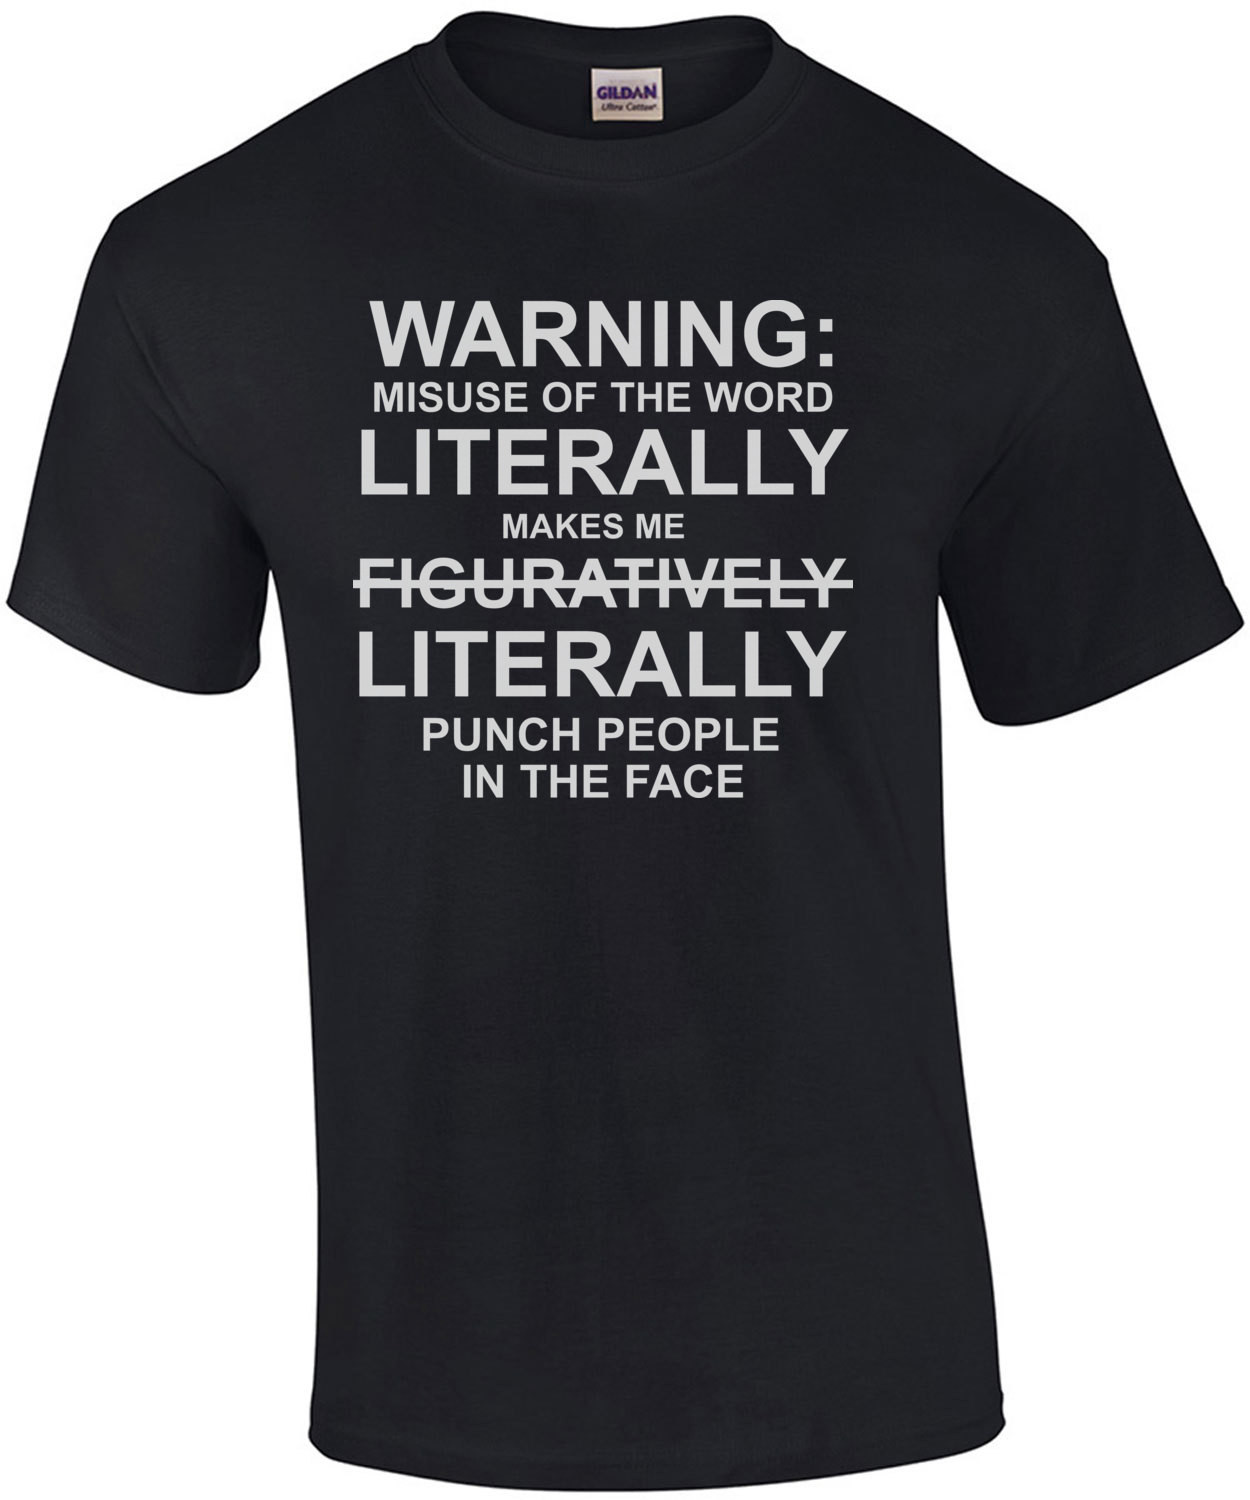 Warning: misuse of the word literally makes me punch people in the face - funny t-shirt